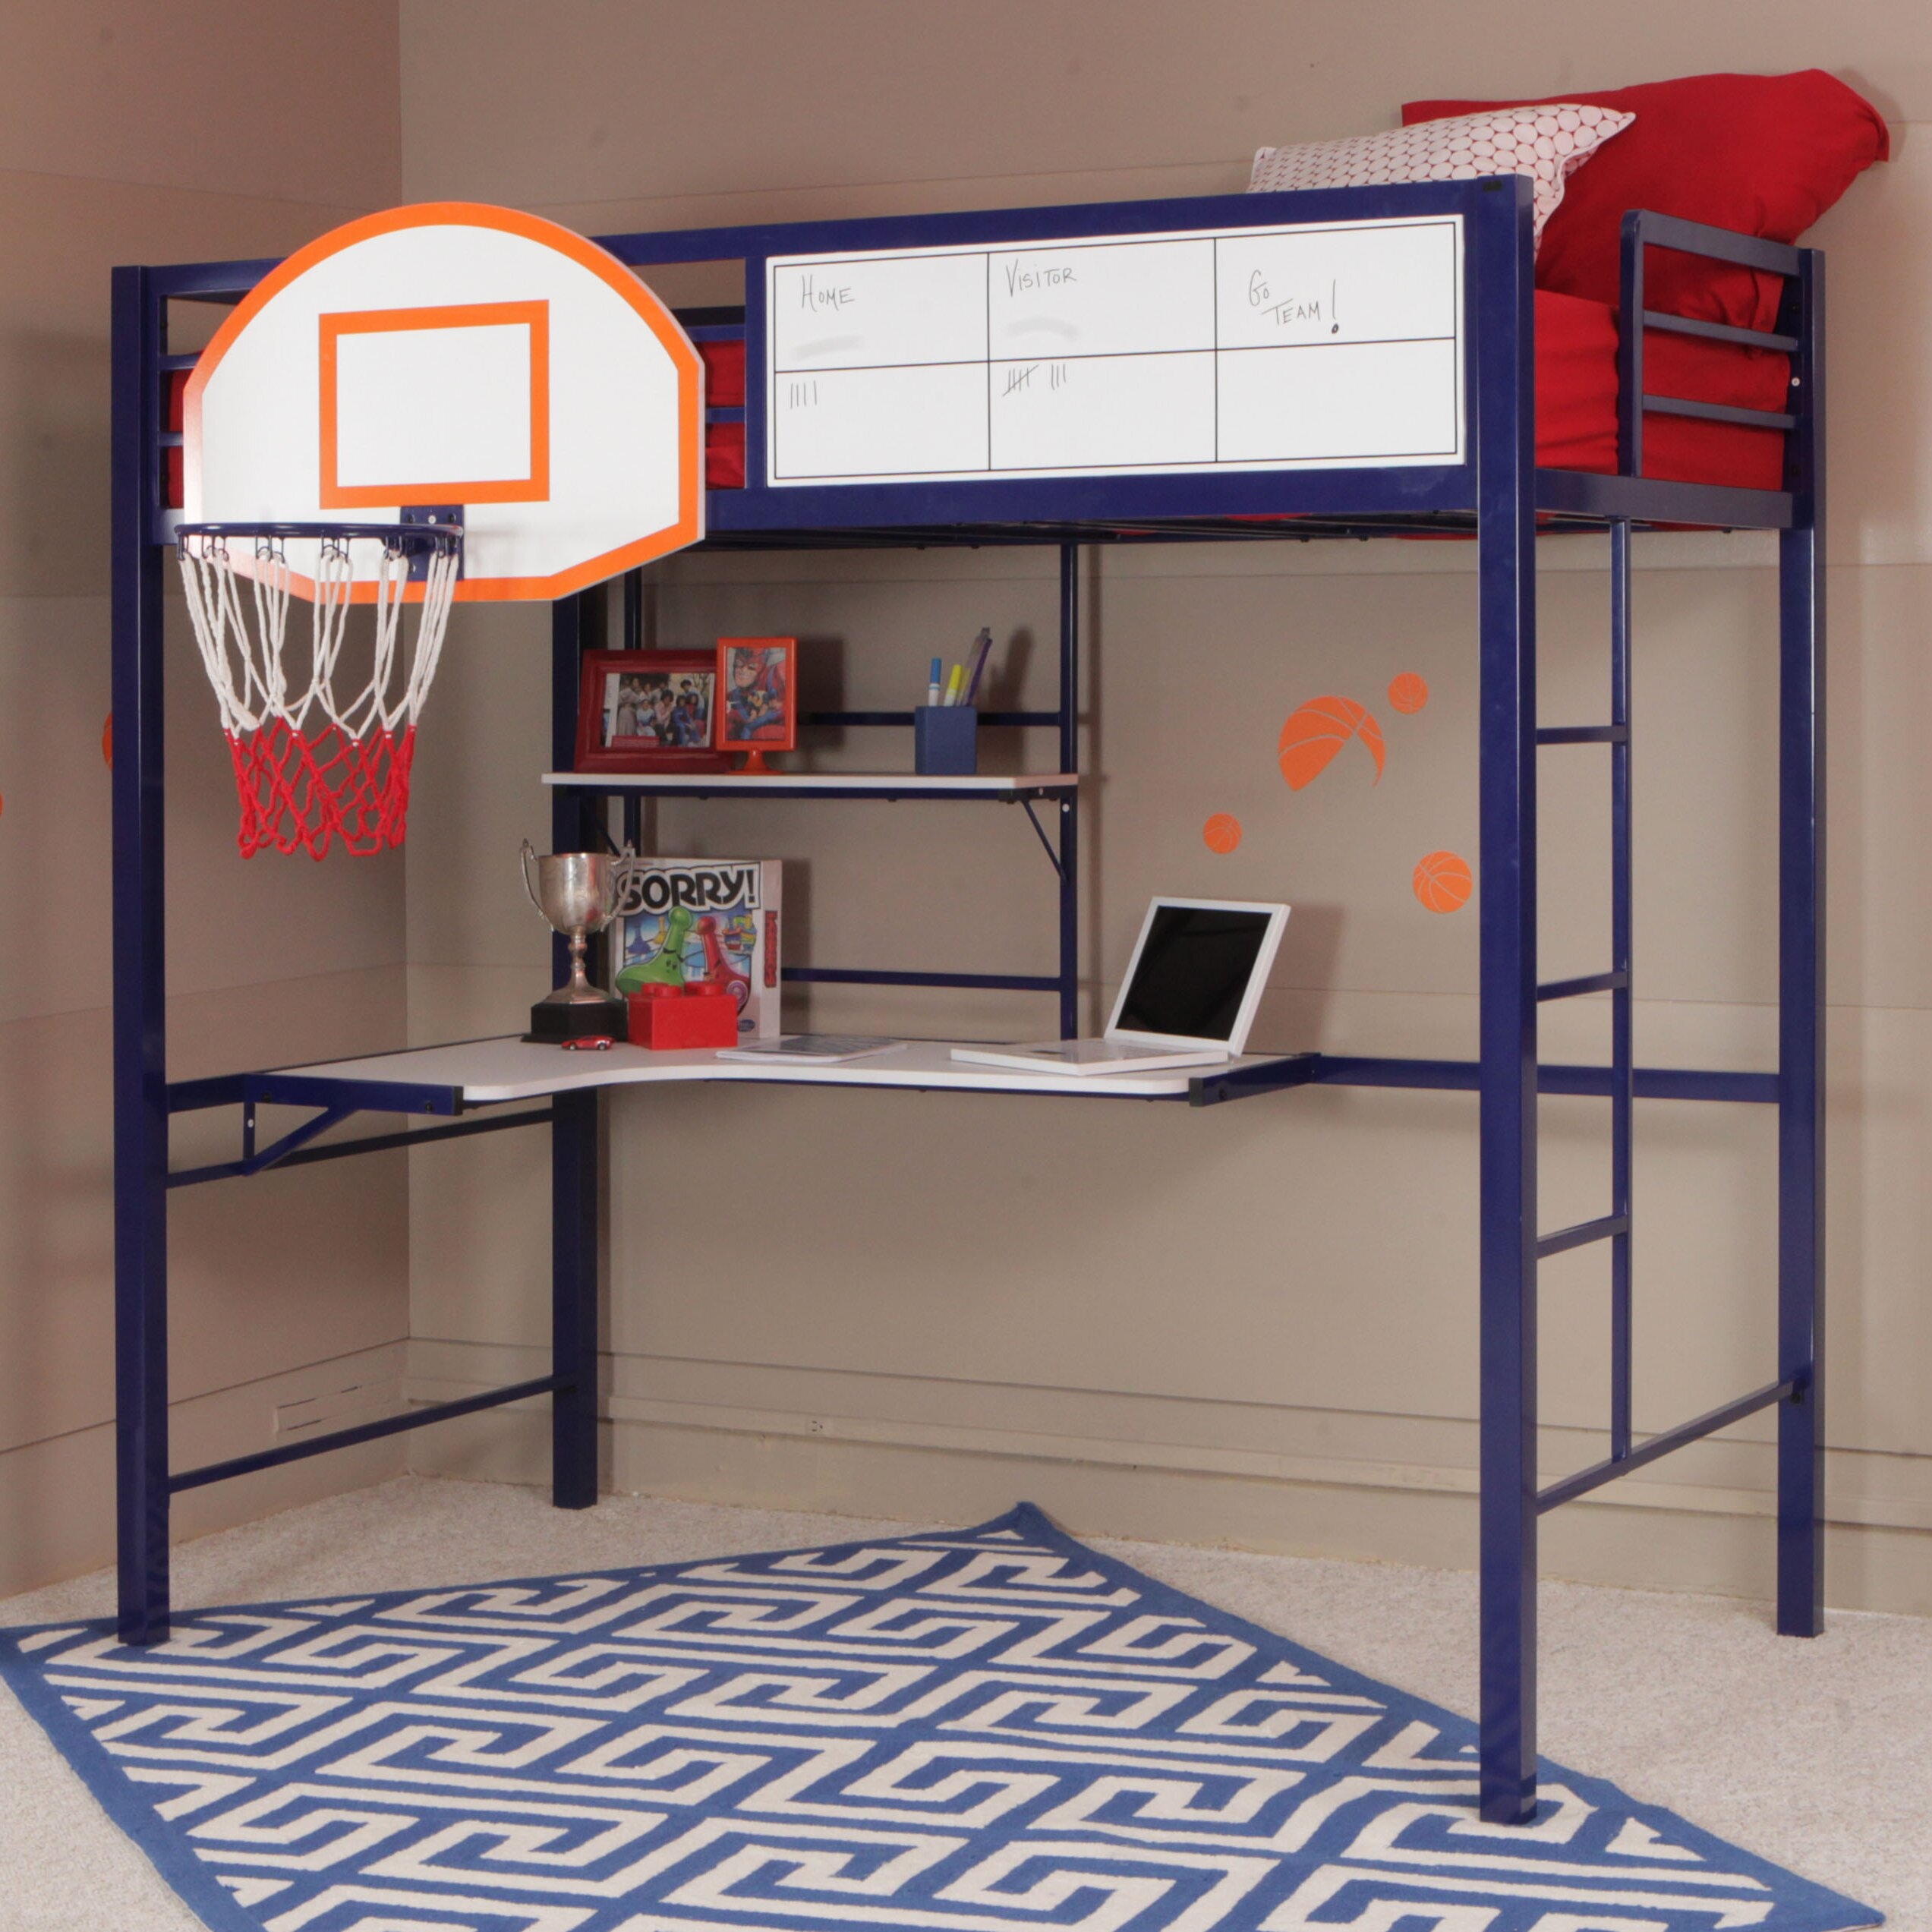 Powell Furniture Hoops Basketball Bed Bunk Bed